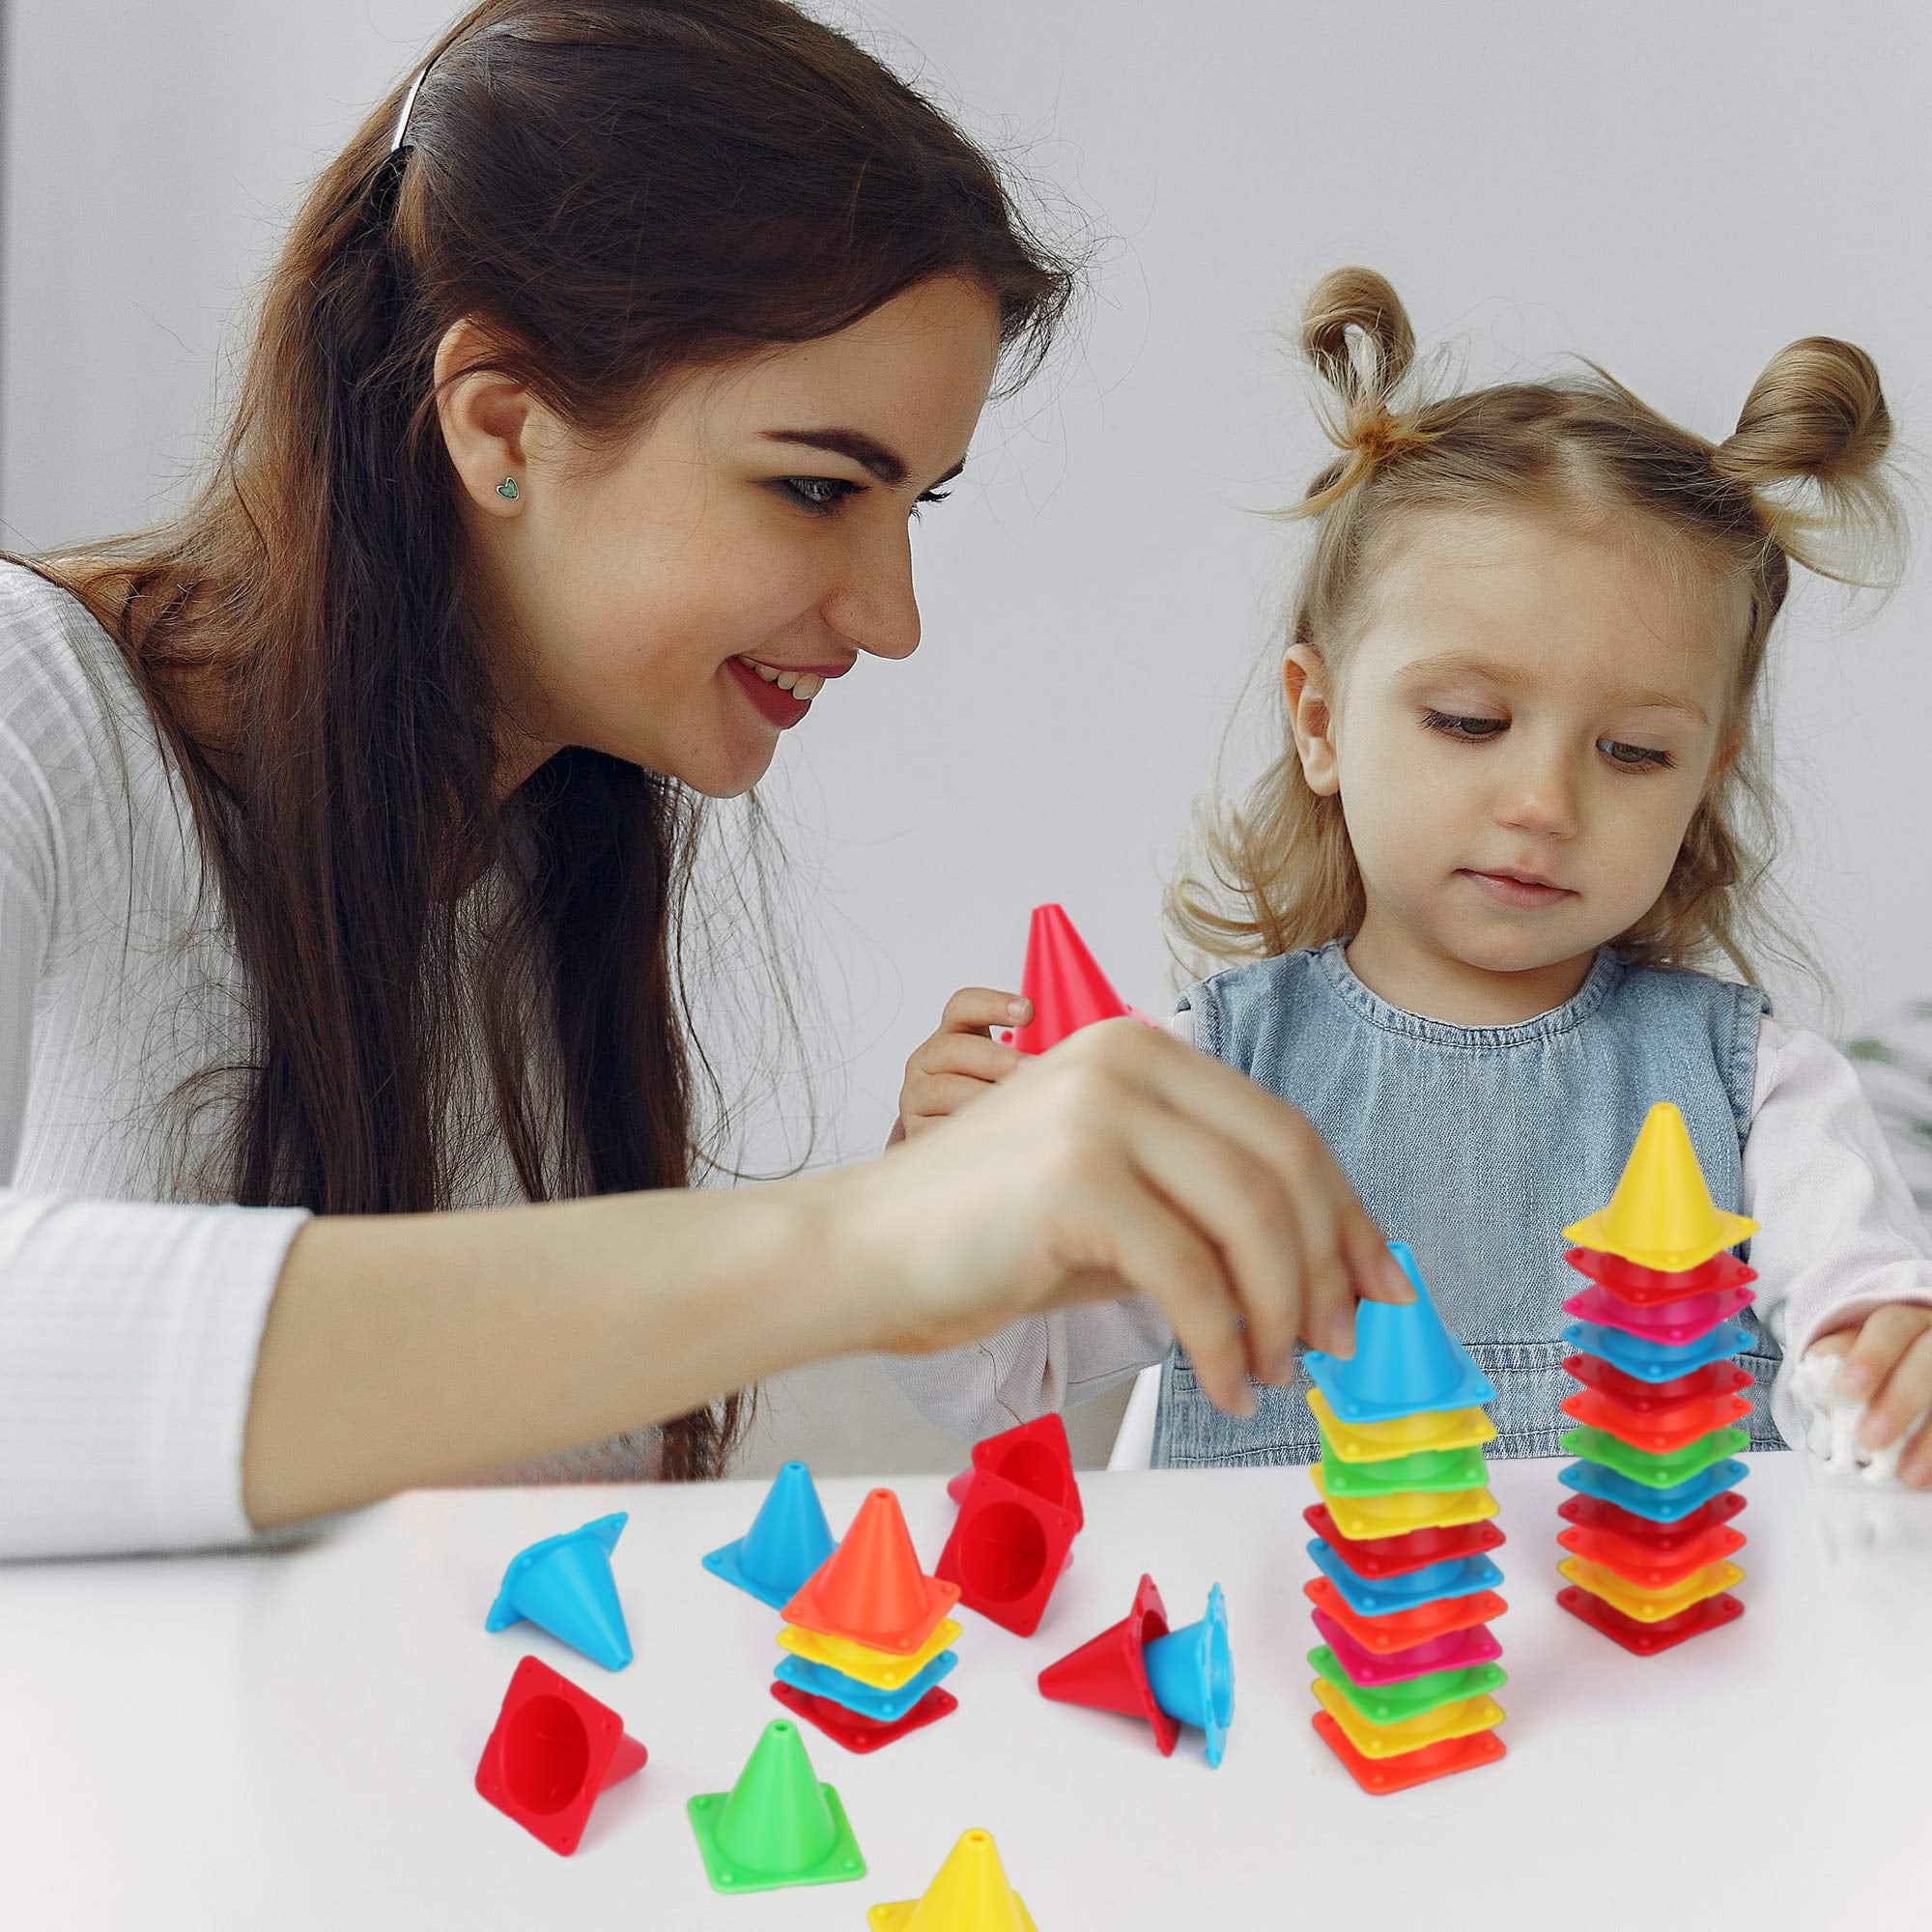 PlayBuild ConestaX Stacking Game - 48 Pcs Cones Balancing Stacking Toy -  Fun STEM / STEAM Activity Games for Toddler - Educational Cone Stack Toys  